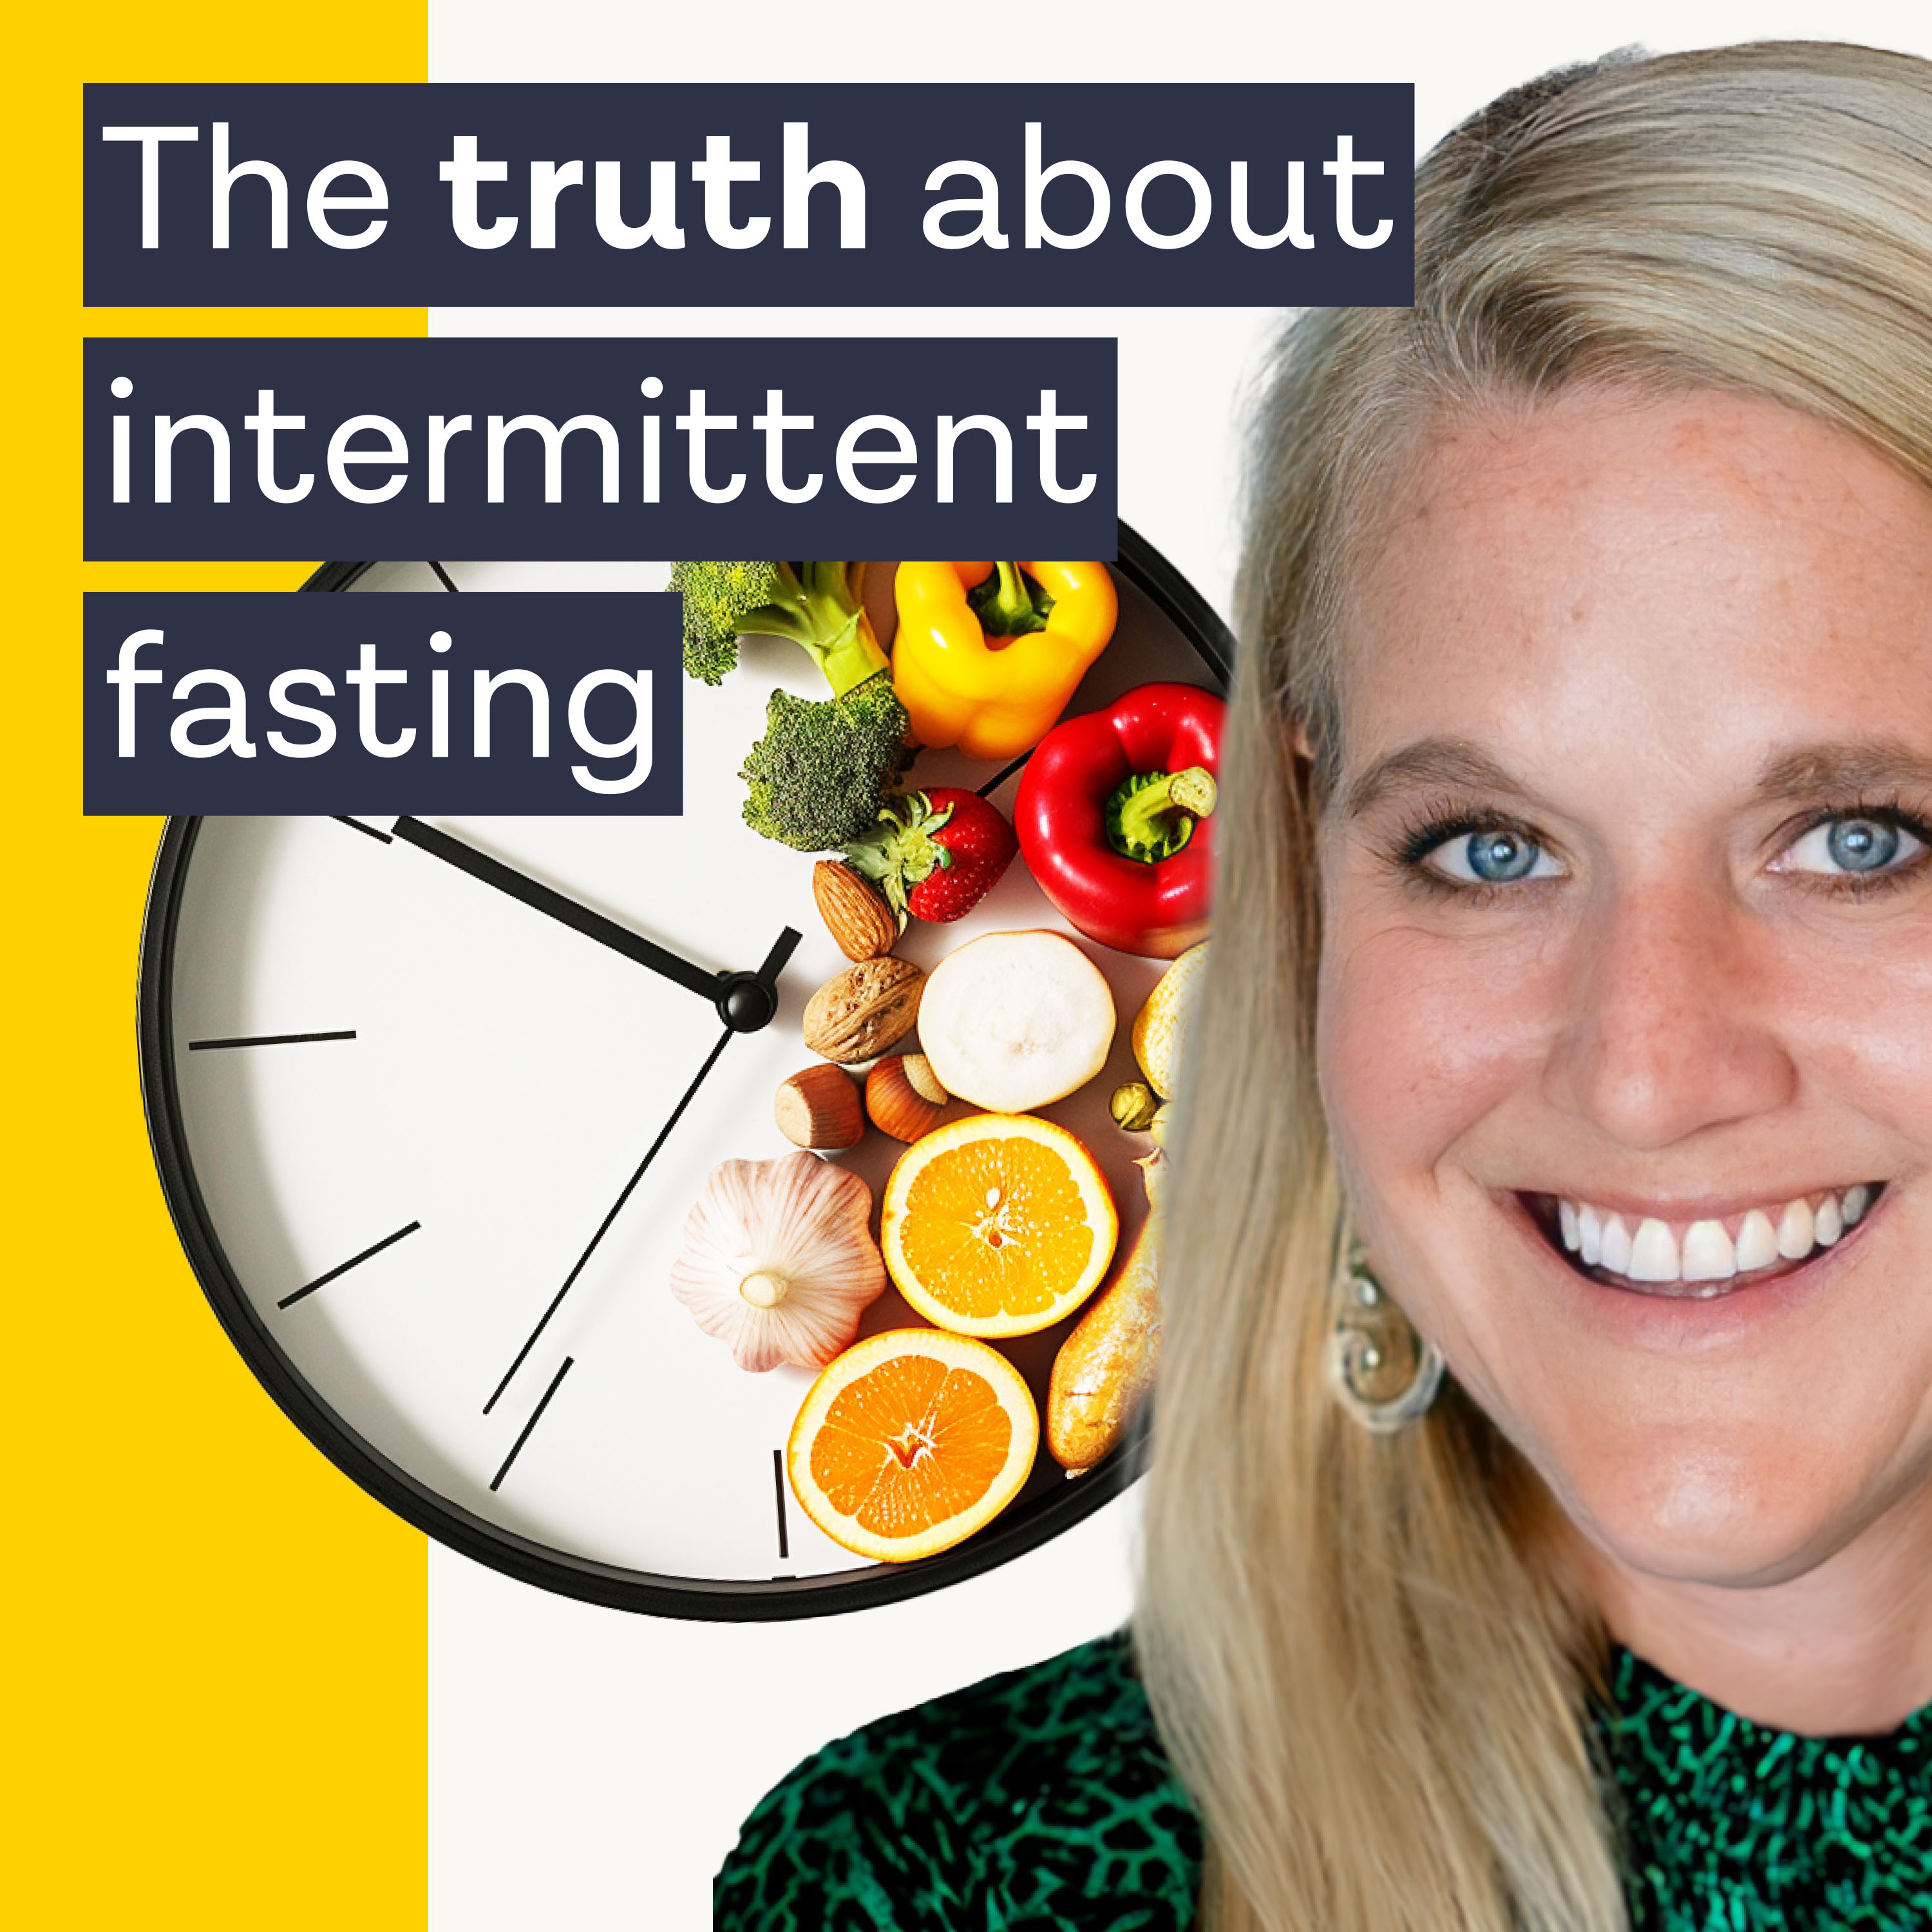 Intermittent fasting: what we learned from the world's biggest study with Prof. Tim Spector & Gin Stephens by ZOE